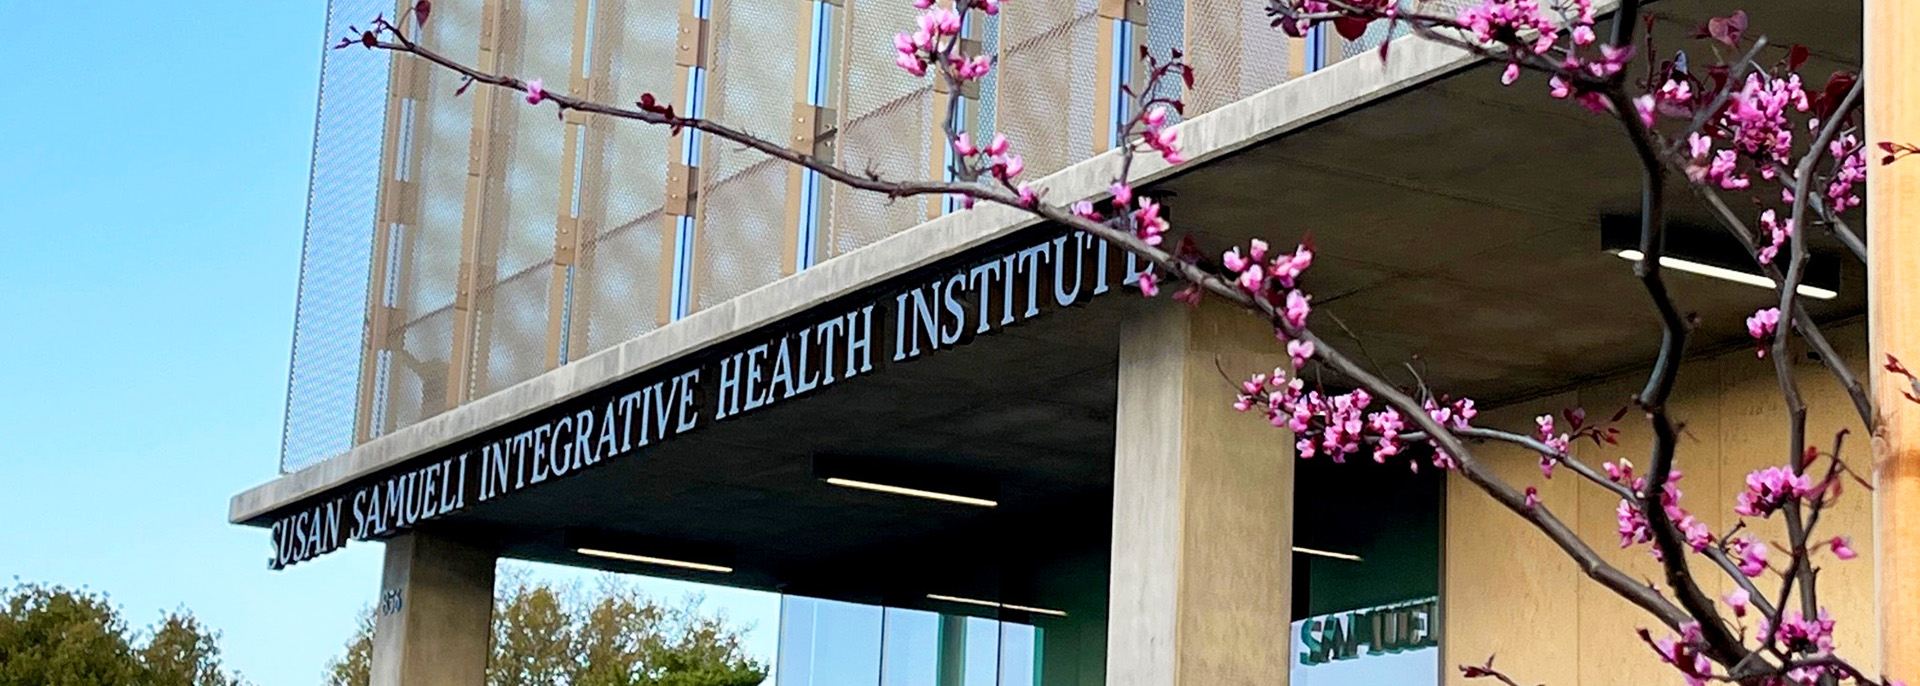 Spring blooms outside the UCI Susan Samueli Integrative Health Institute